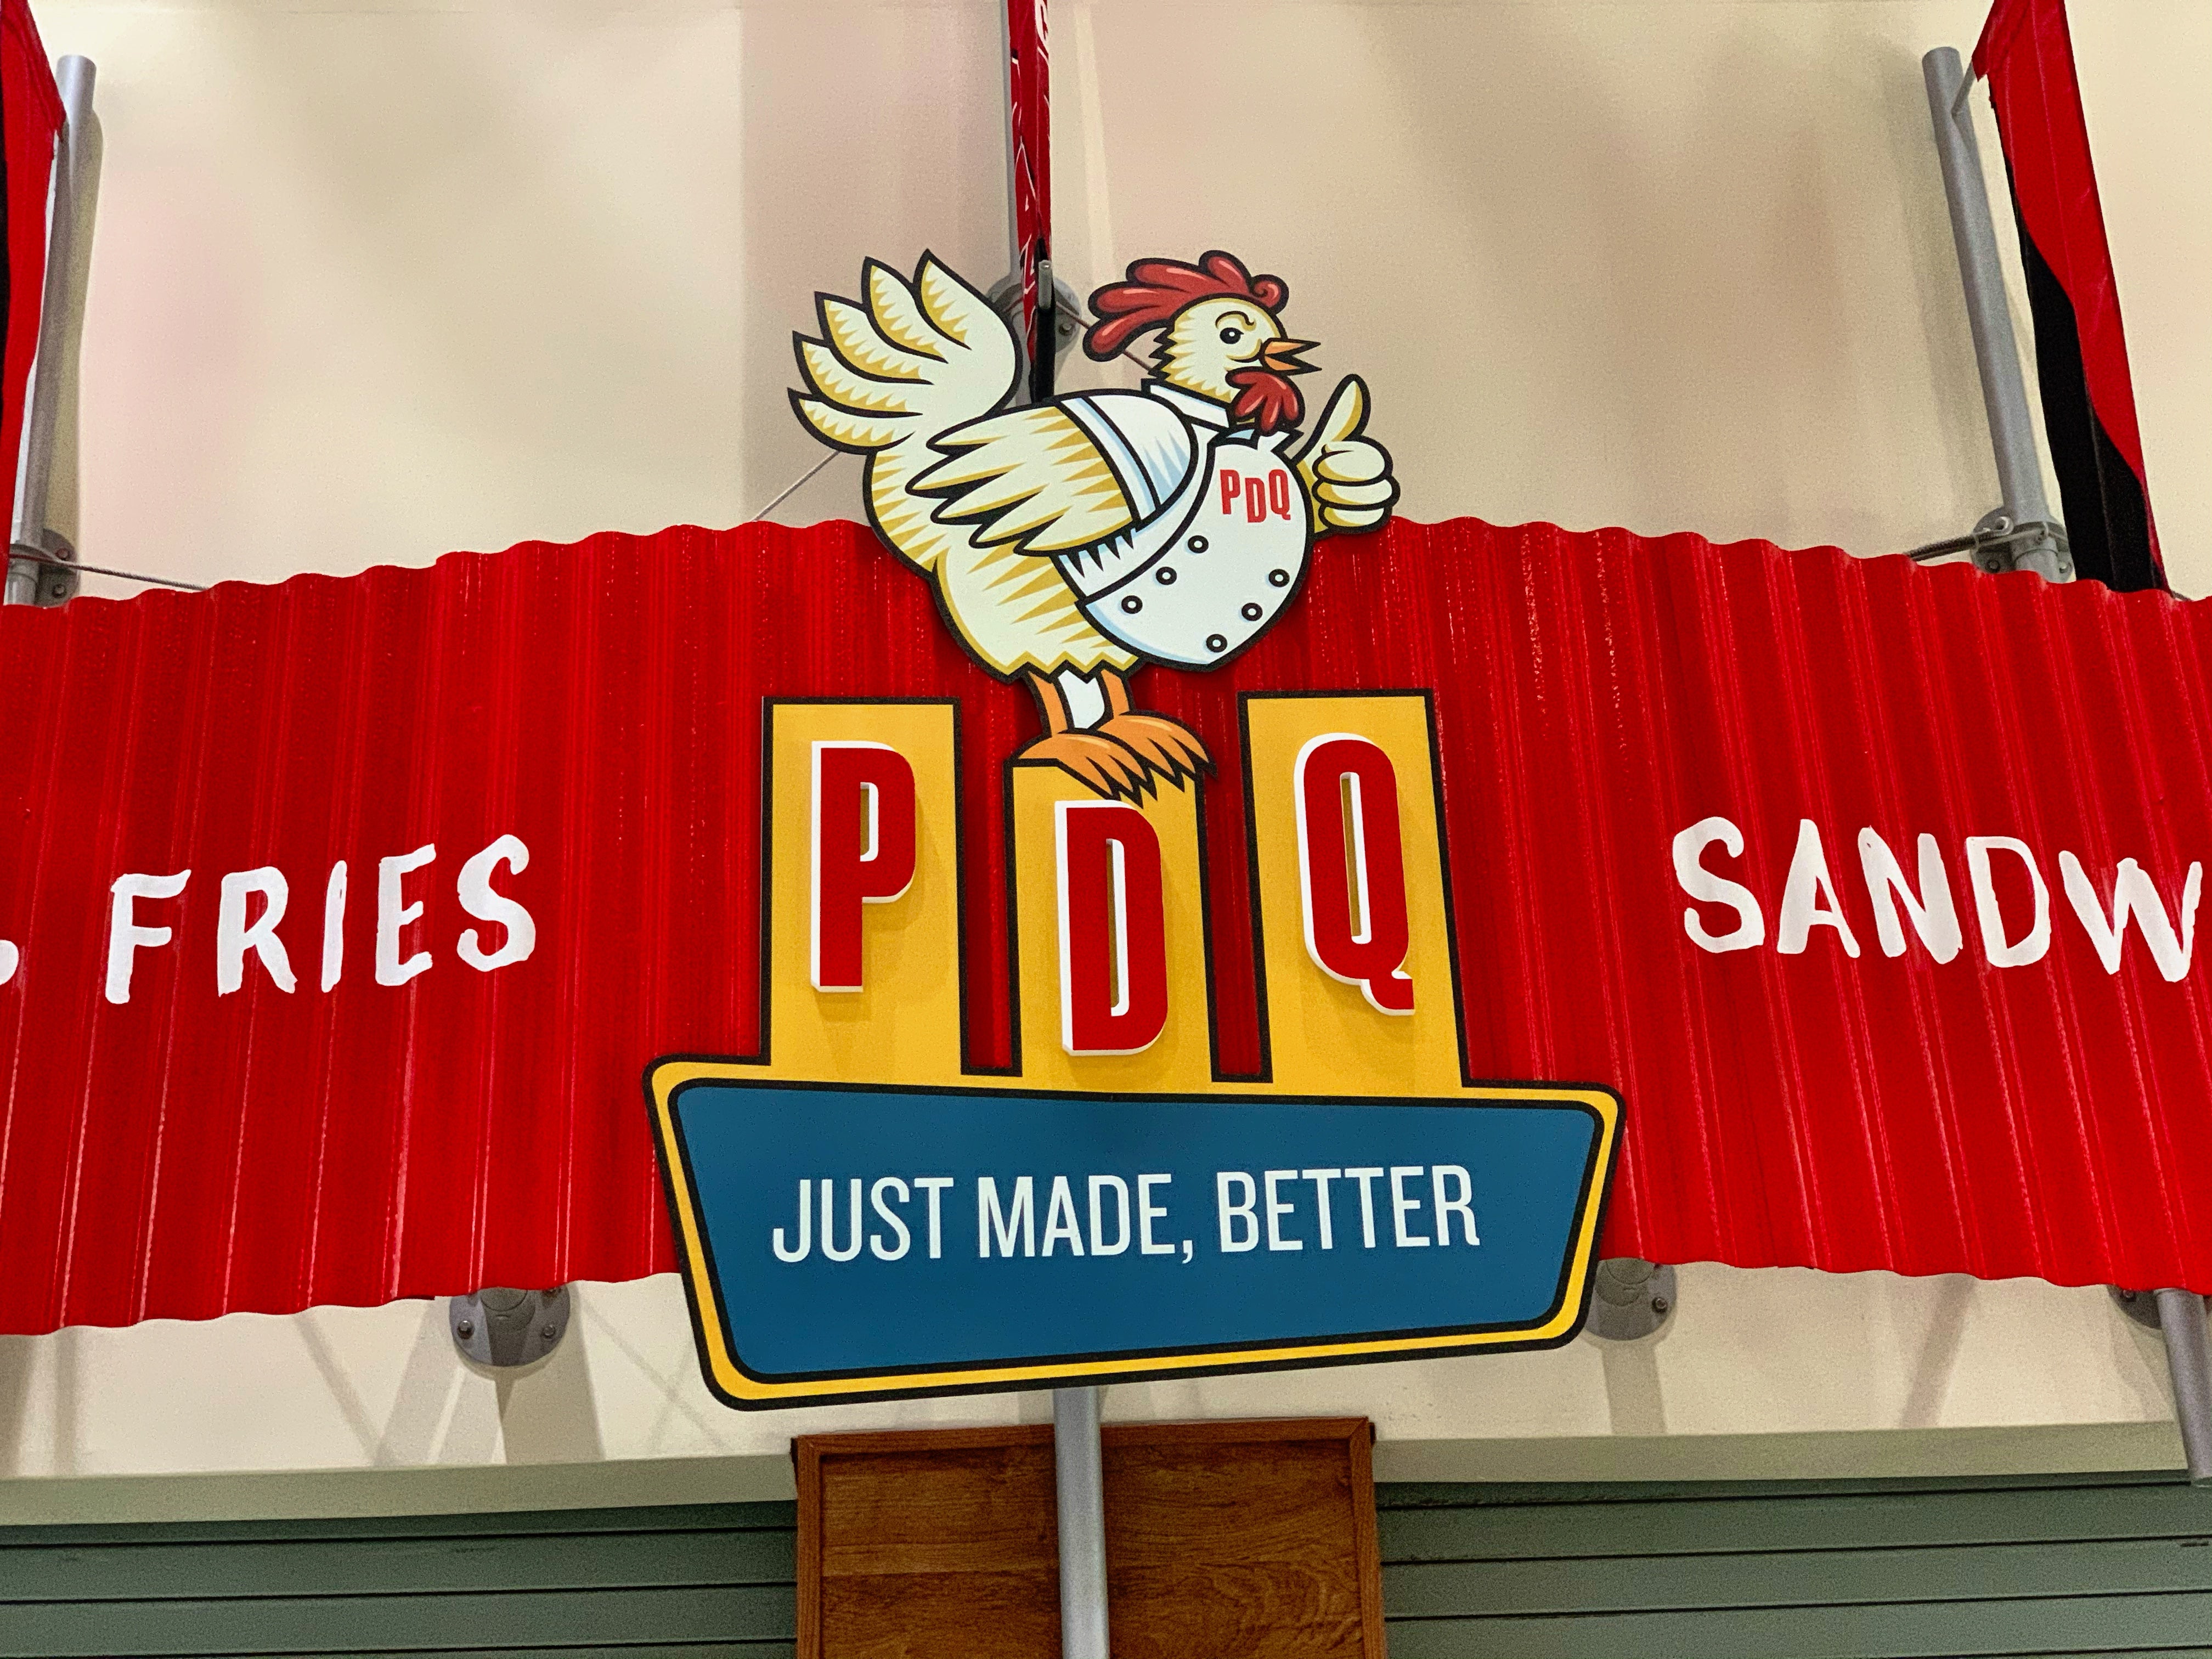 PDQ: Section 130, 301